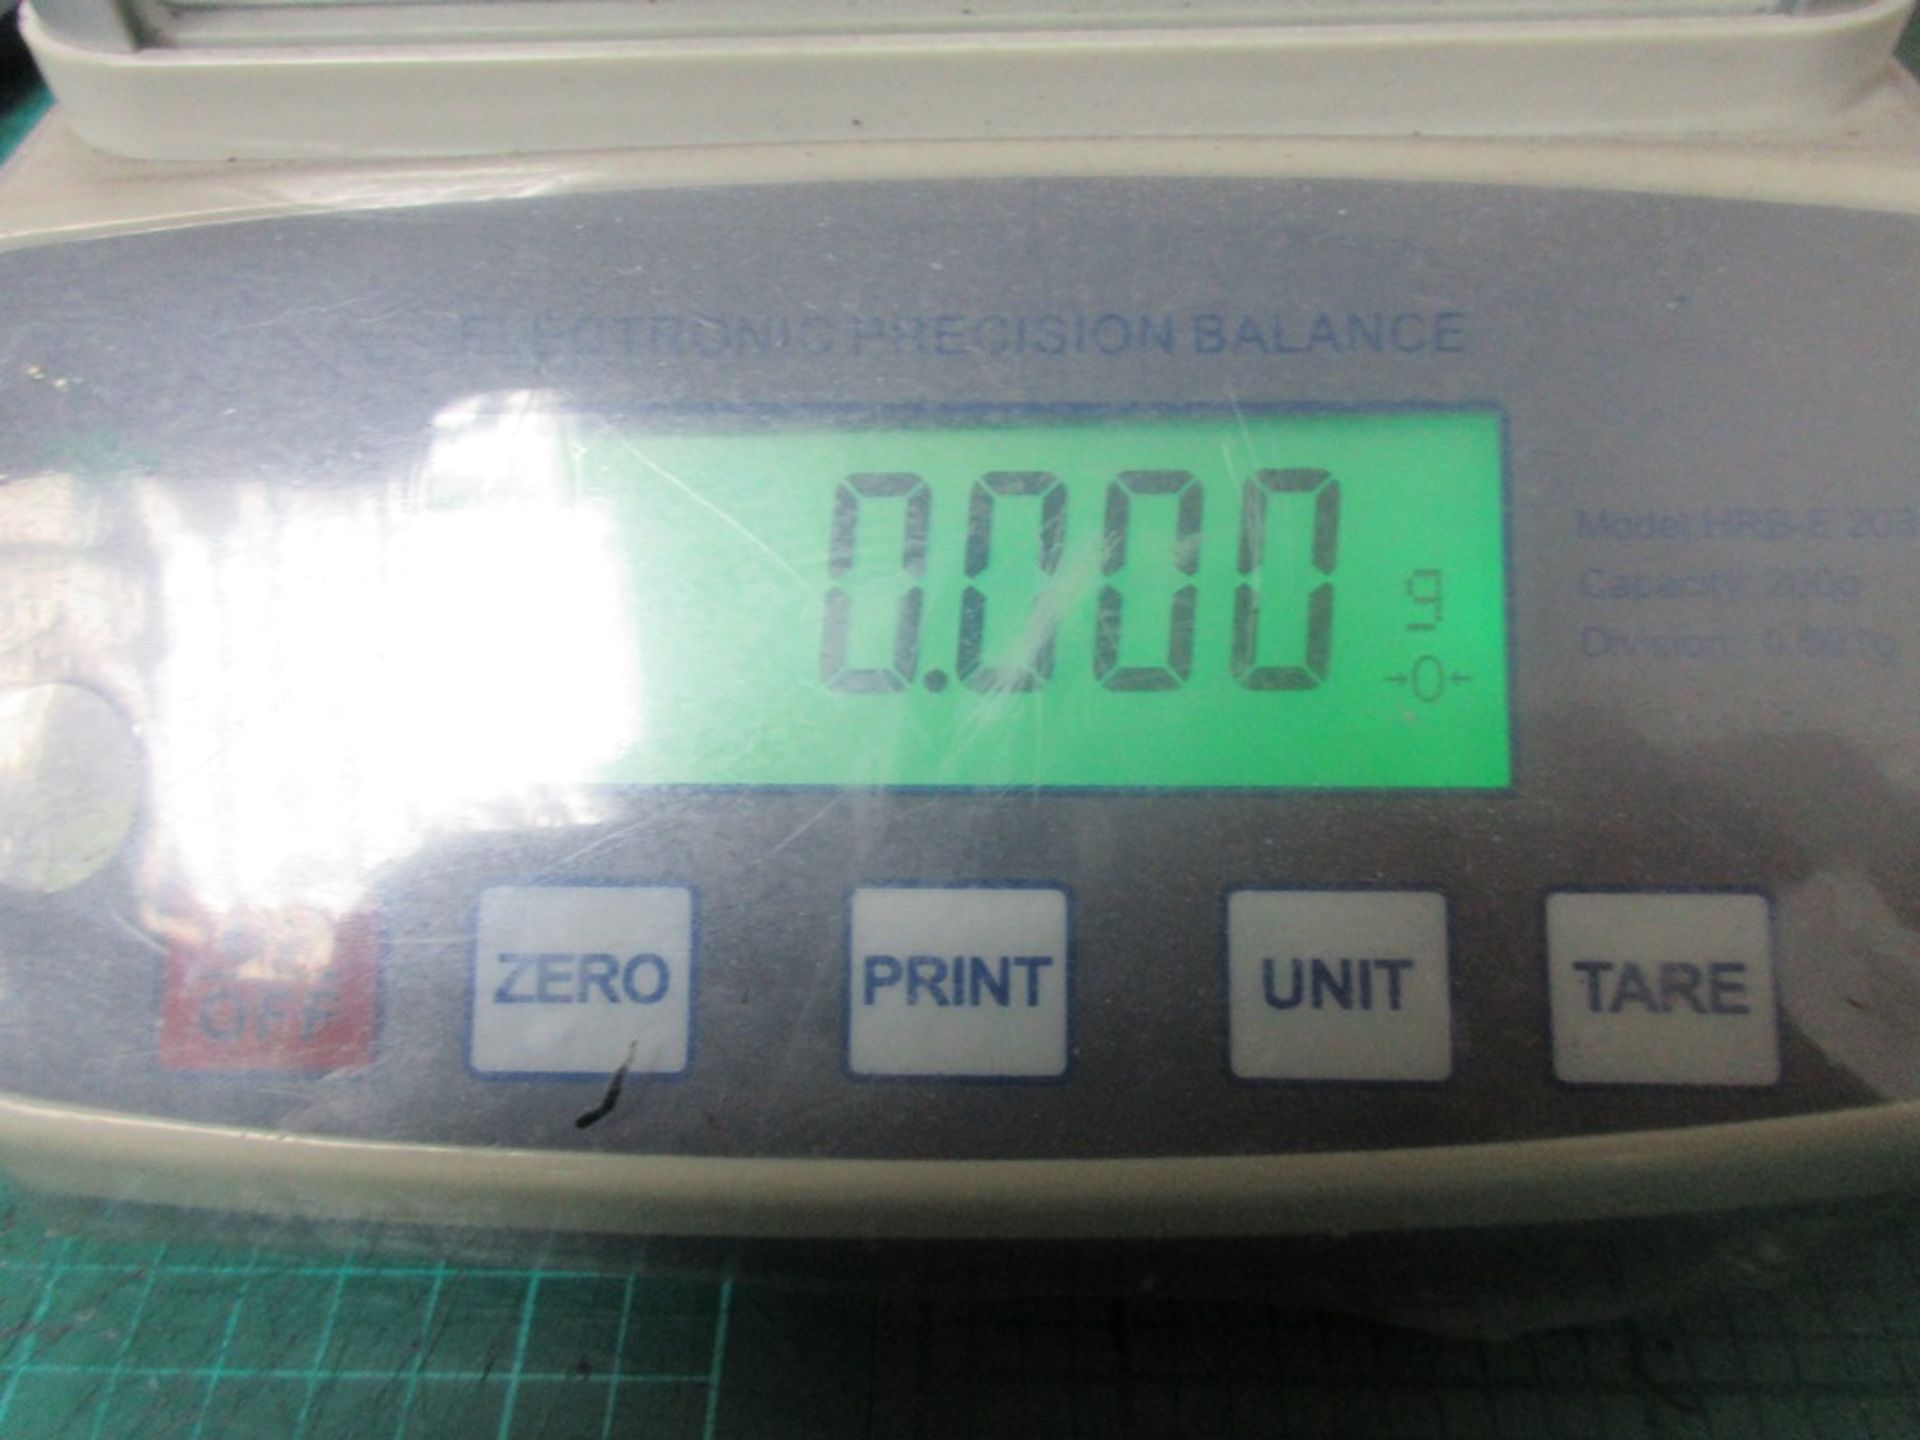 Tree benchtop electronic precision balance, model HRB-E-203, capacity 200g / division 0.001g - Image 2 of 3